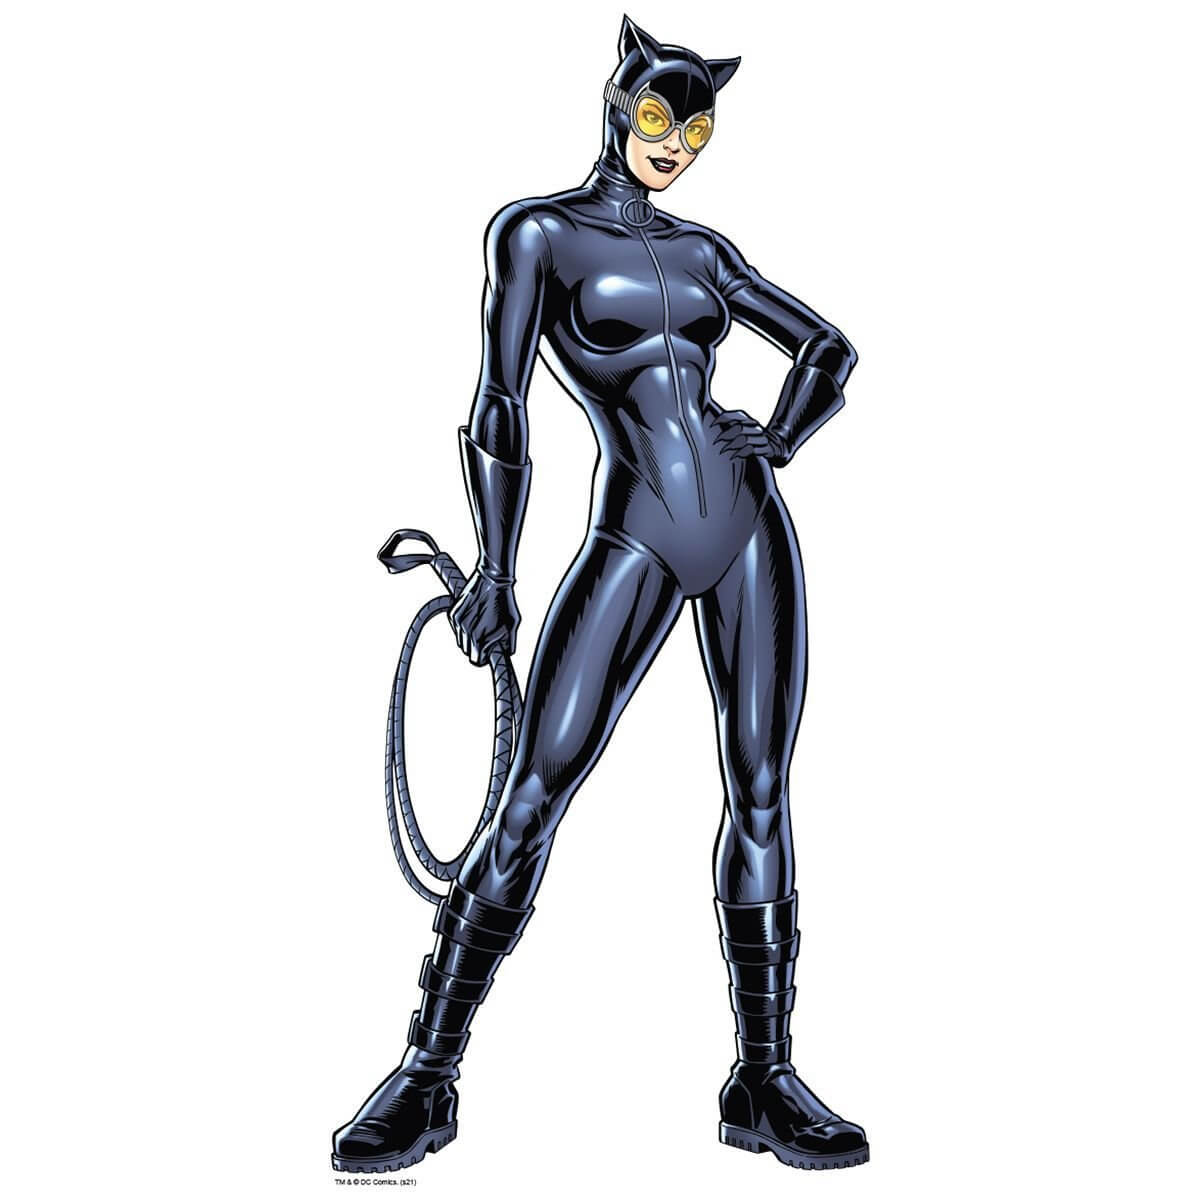 Kismet Decals Catwoman Anti-Hero Licensed Wall Sticker - Easy DIY Justice League Home & Room Decor Wall Art - Kismet Decals